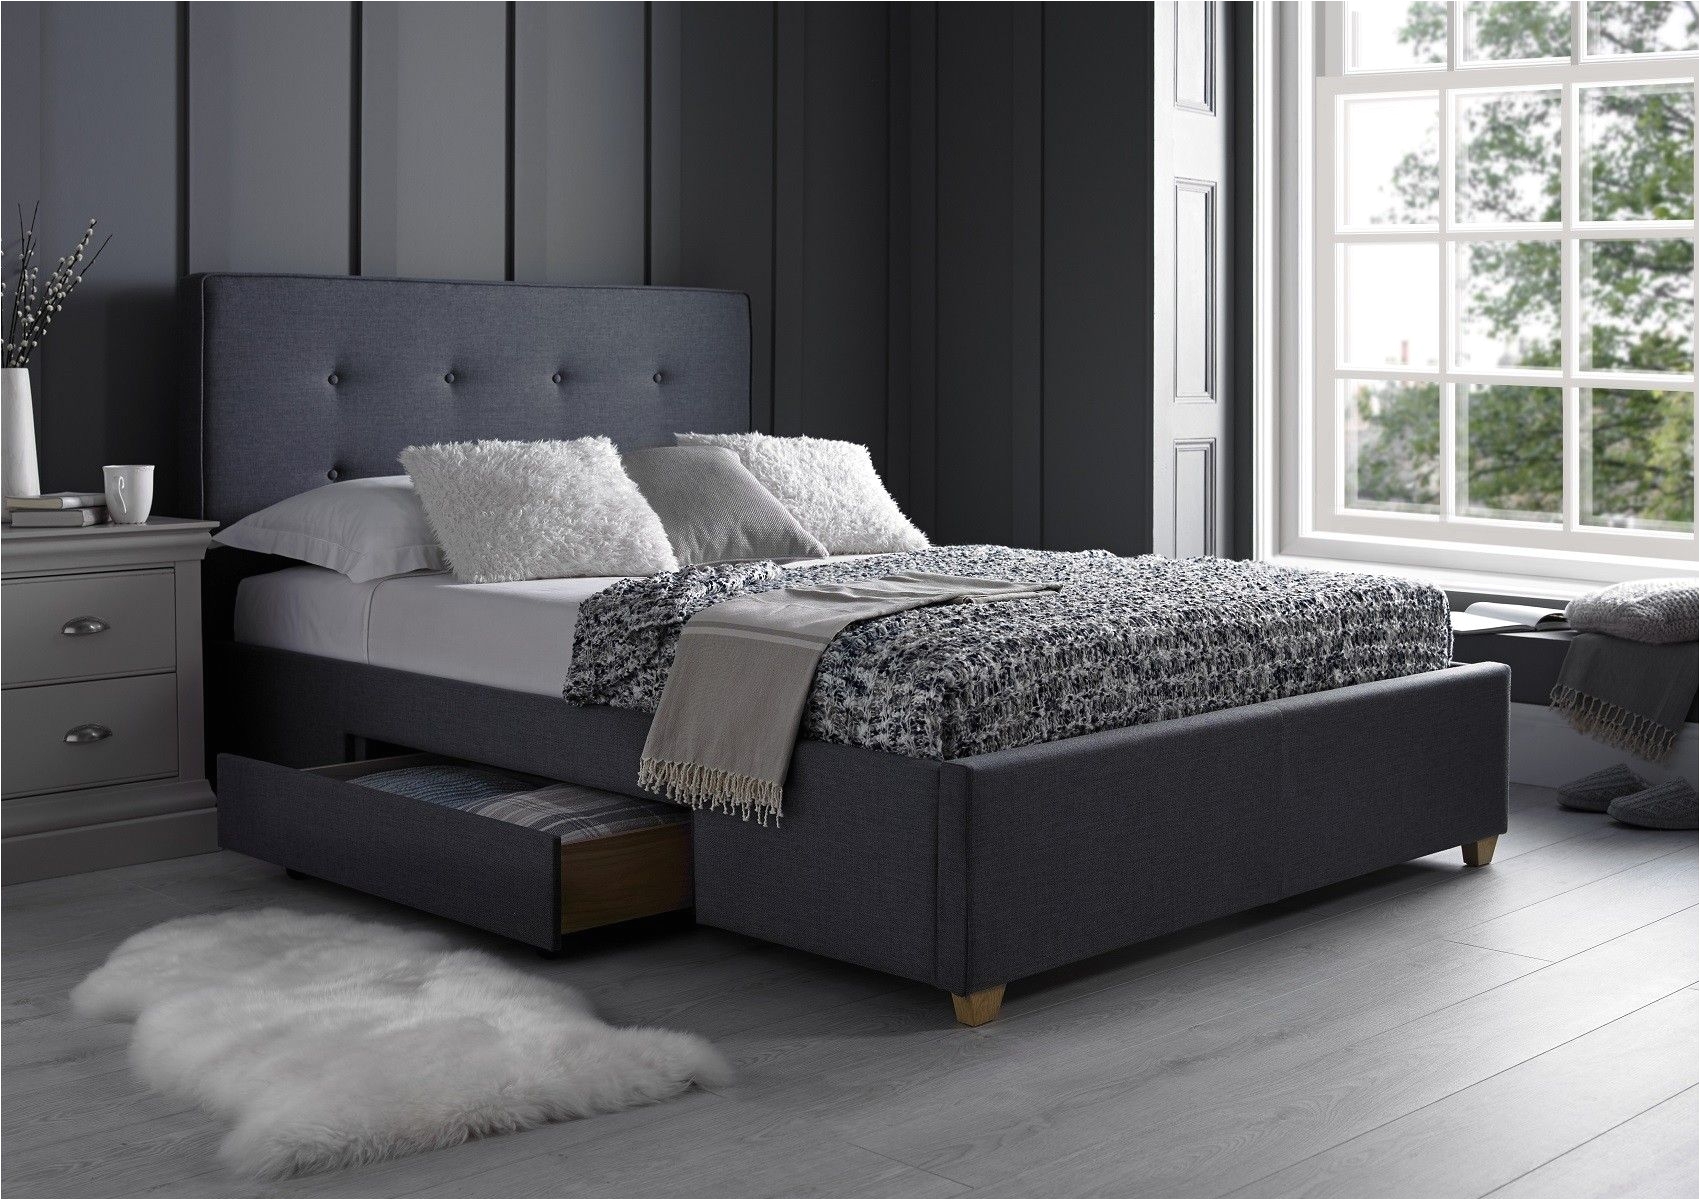 The Milano two drawer bed is new addition to our range which is exclusively made for Time 4 Sleep Upholstered in an a grey graphite textured weave fabric